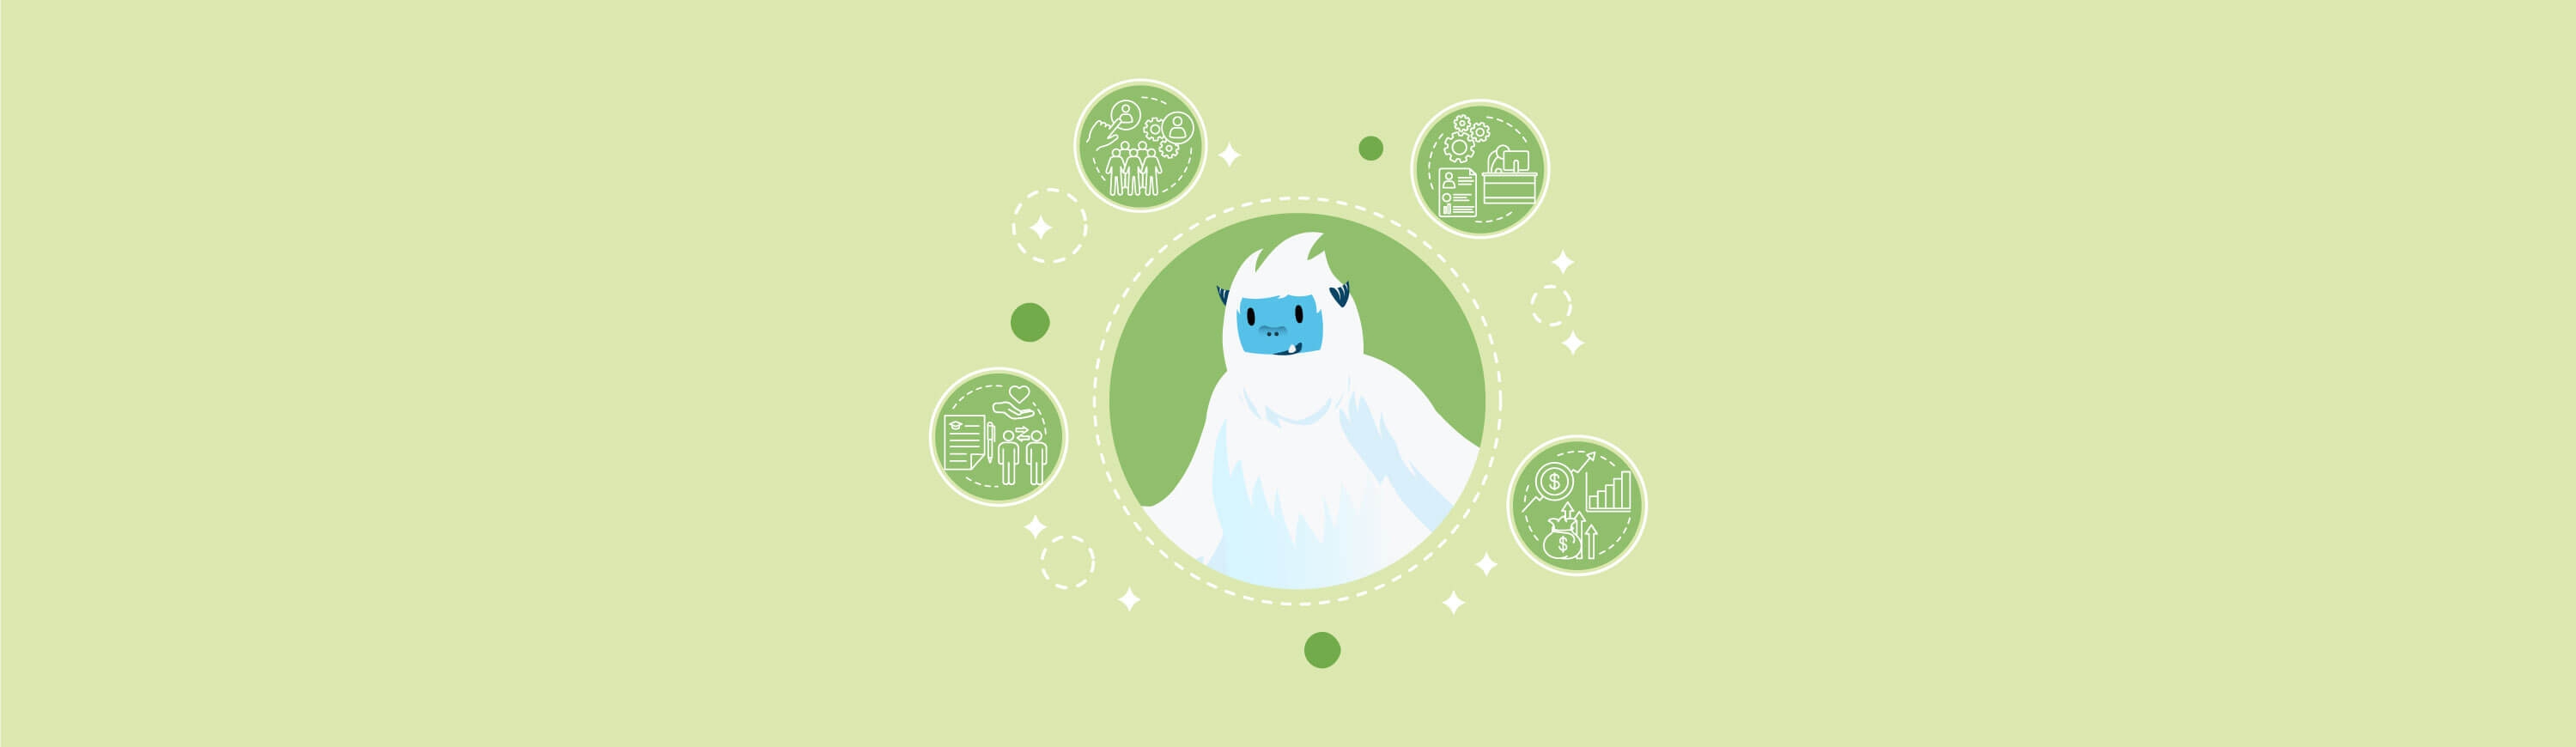 Illustration of Carl the Yeti surrounded by icons of the different steps of employee experience.